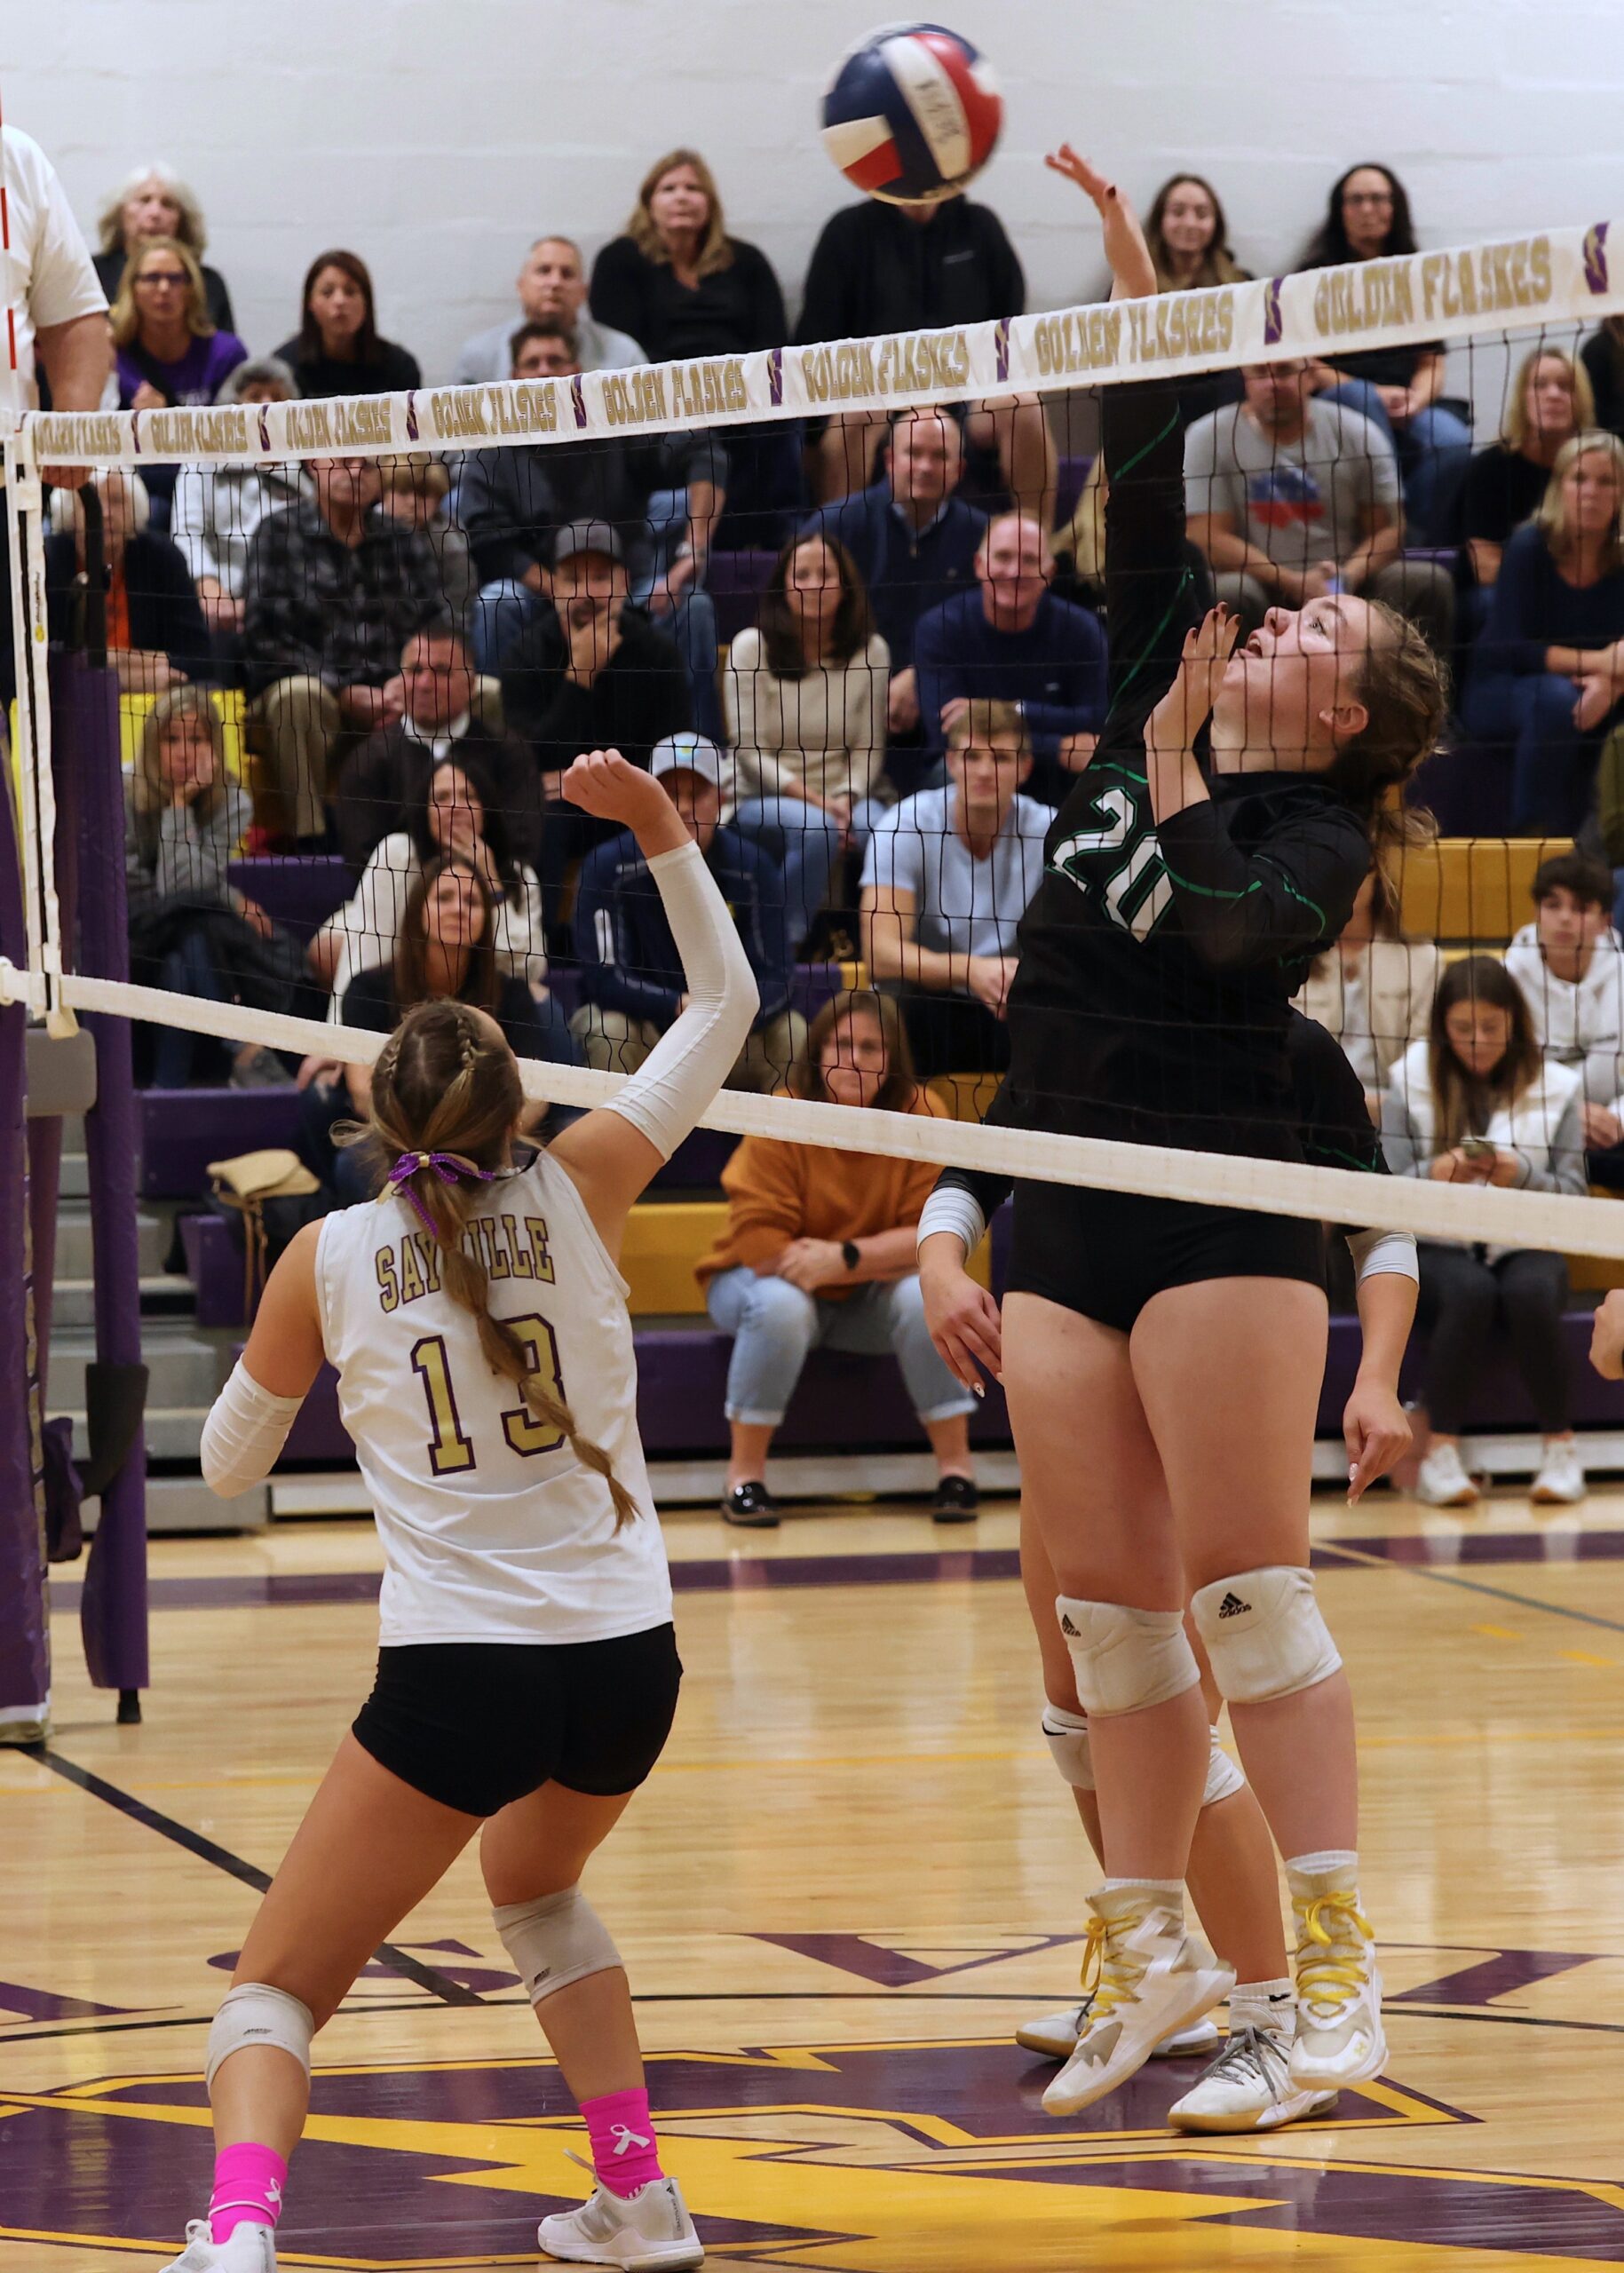 Senior middle blocker Sydney Anastasia with a solo block at the net. MICHAEL O'CONNOR